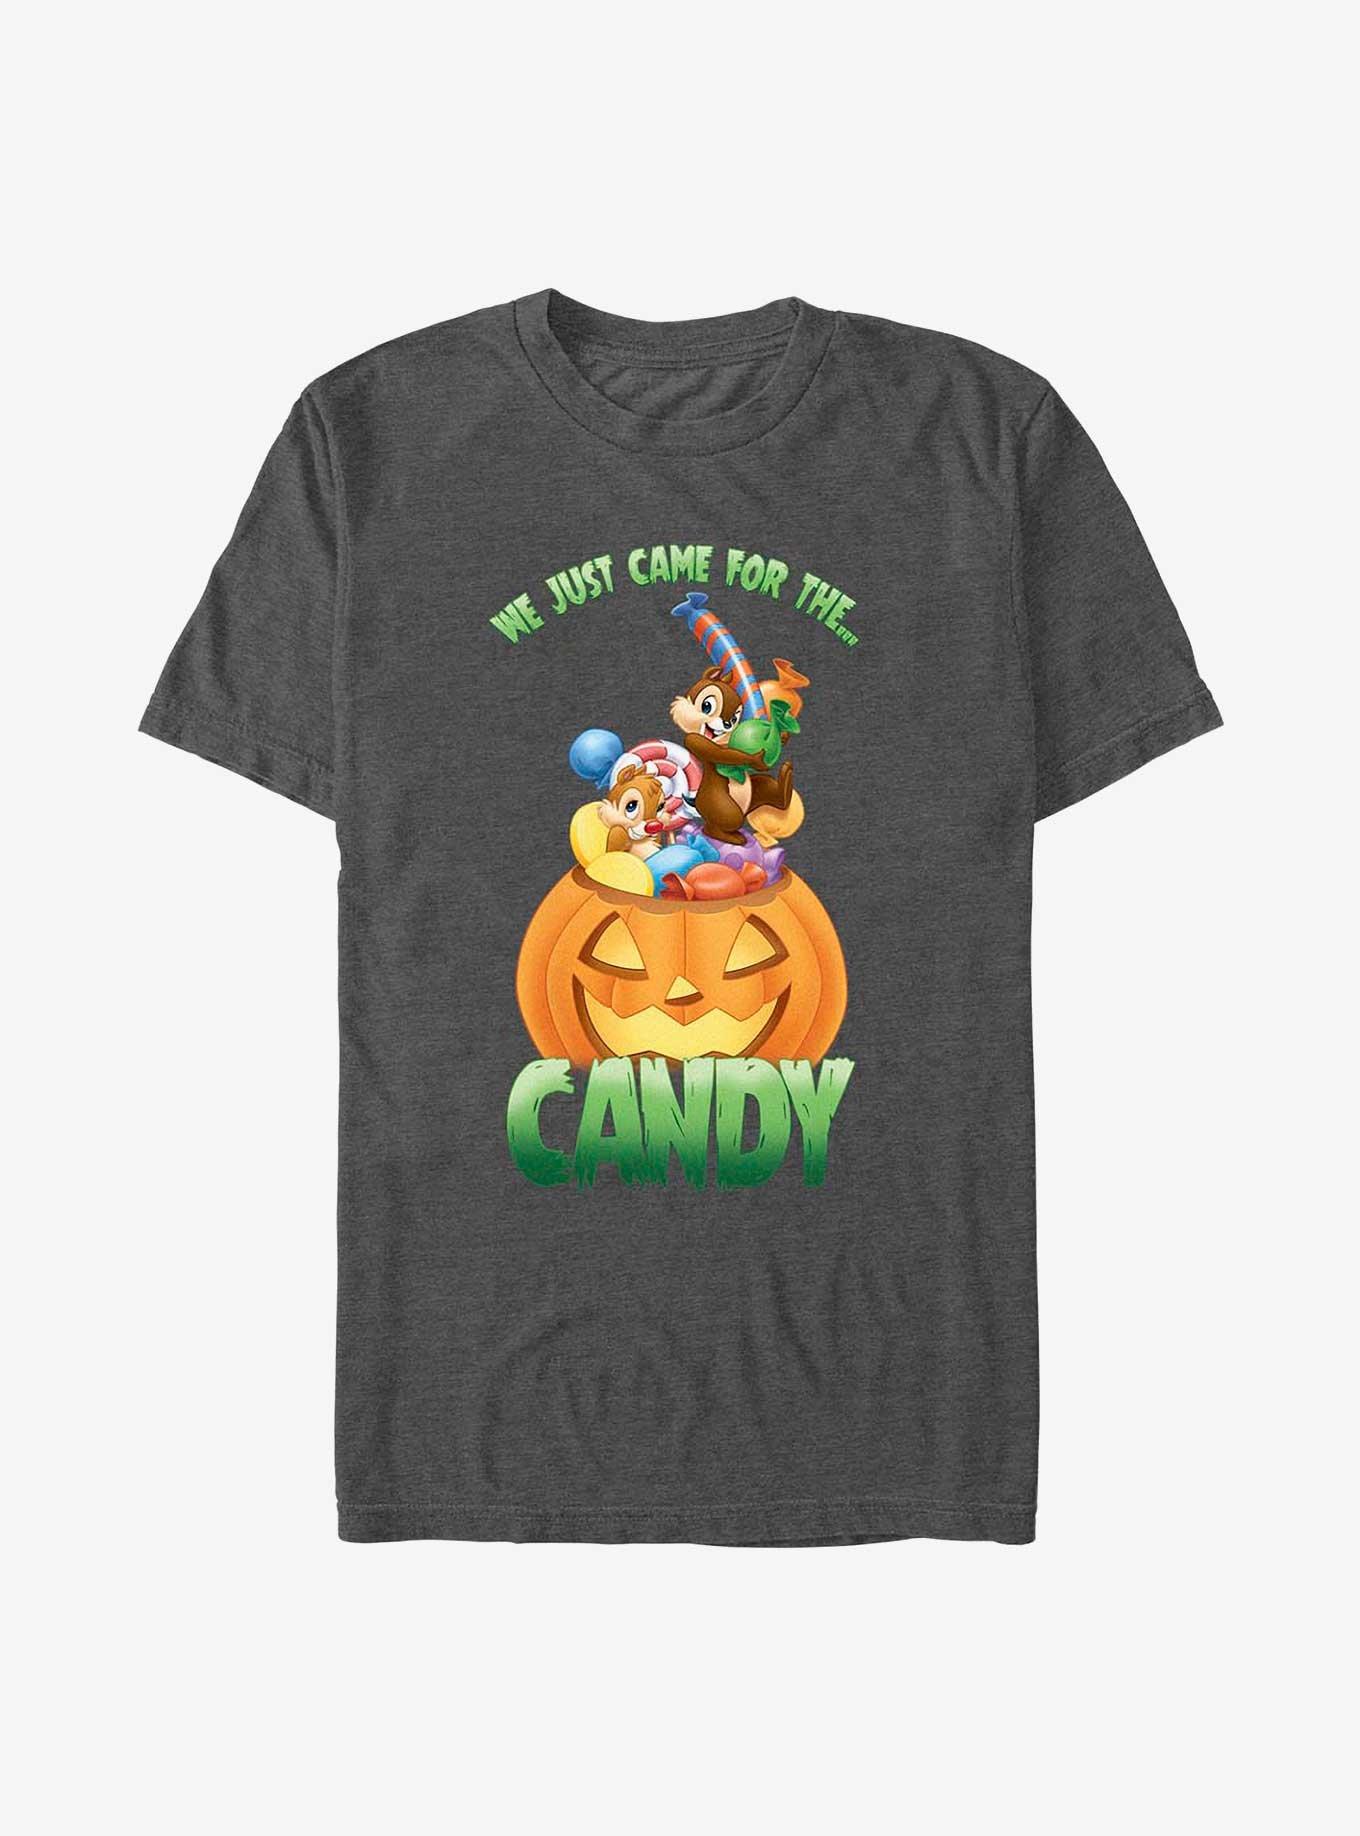 Disney Chip 'n' Dale We Just Came For The Candy T-Shirt, CHAR HTR, hi-res